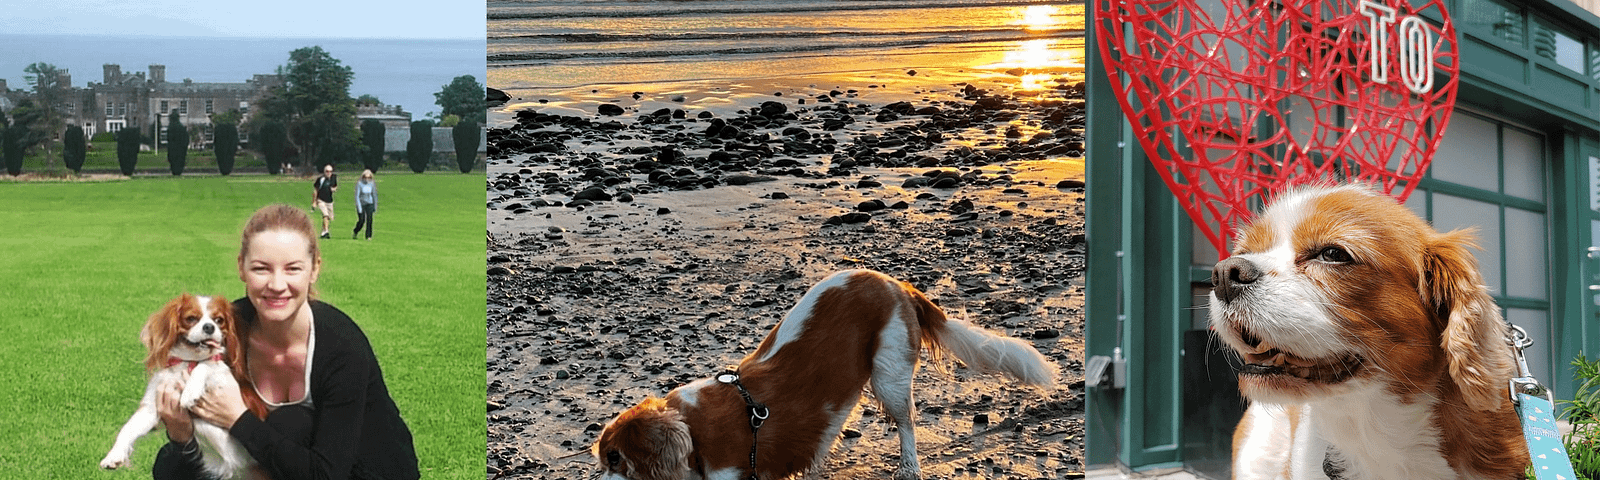 Mango ( a Cavalier King Charles Spaniel dog) pictured at 3 different places. 1. park in Ireland. 2. beach in New Zealand. 3. downtown Toronto in Canada